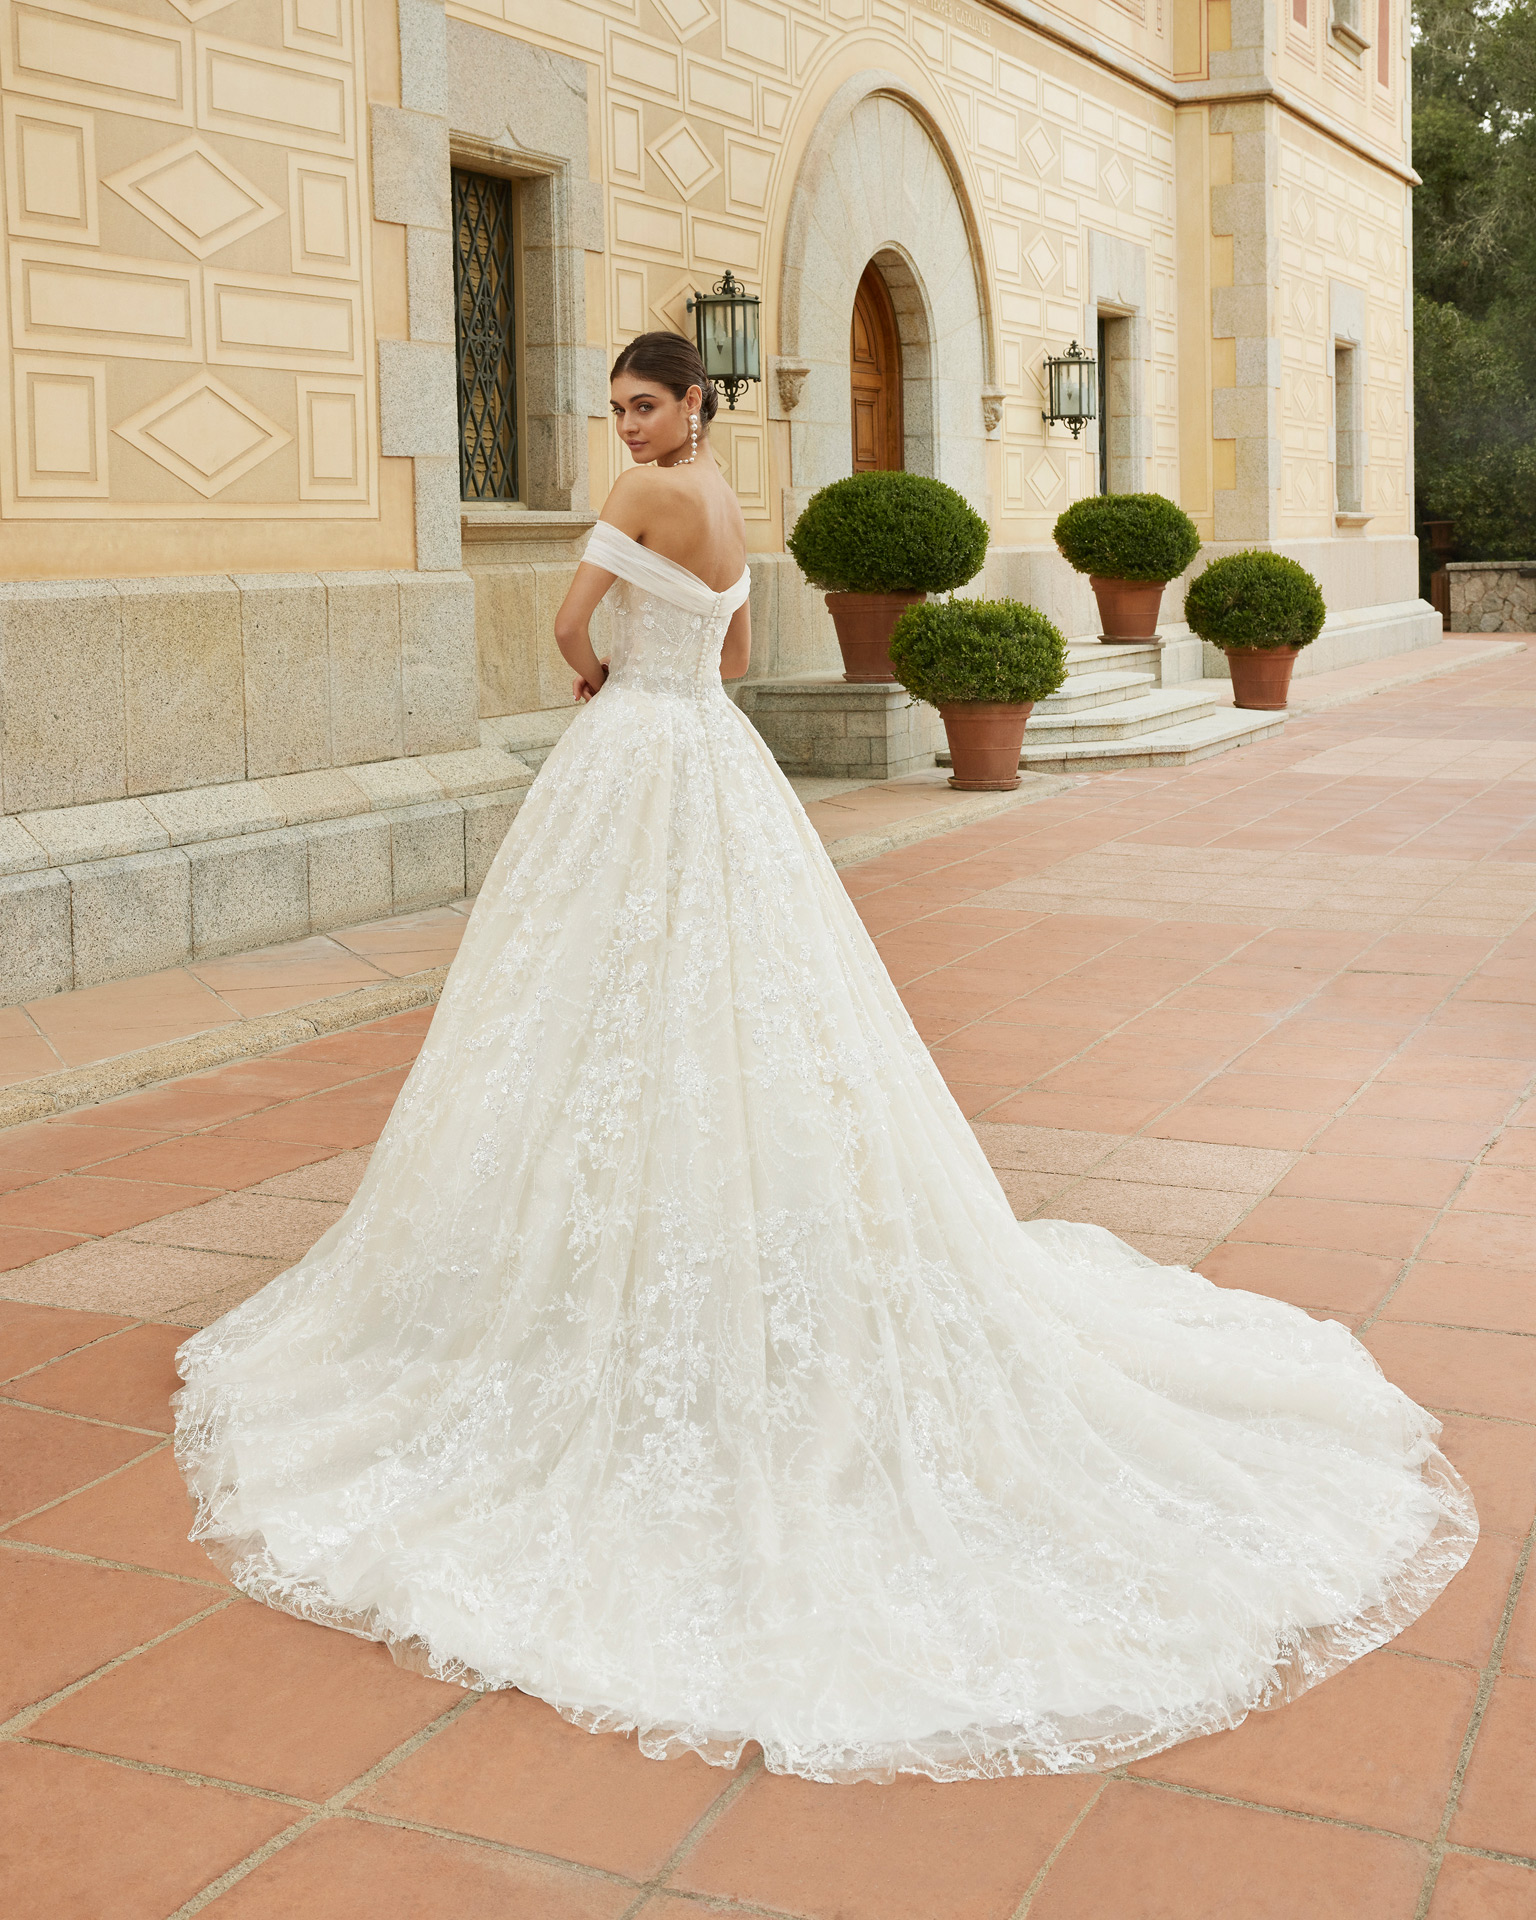 Romantic princess wedding dress. Crafted in lace and beadwork, it features a cuff neckline and buttoned back for a simply ideal look. Dreamy Luna Studio design. LUNA_NOVIAS.